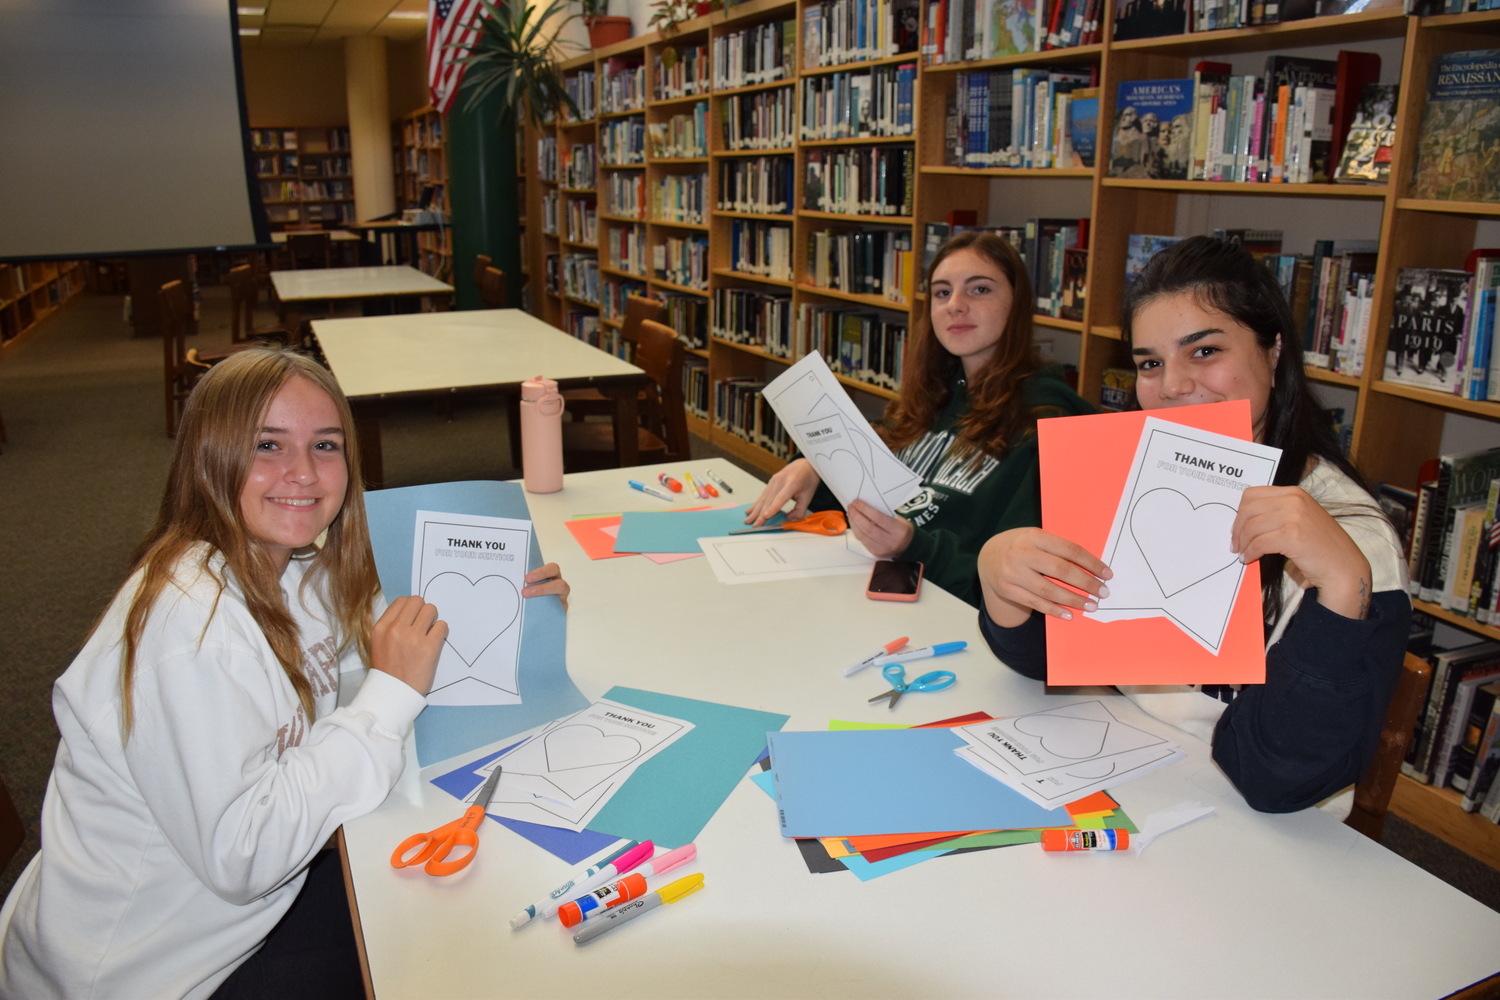 Westhampton Beach High School students created thank-you cards for veterans as part of a community service collaboration between the Westhampton Free Library and Westhampton Beach High School Library. COURTESY WESTHAMPTON BEACH SCHOOL DISTRICT